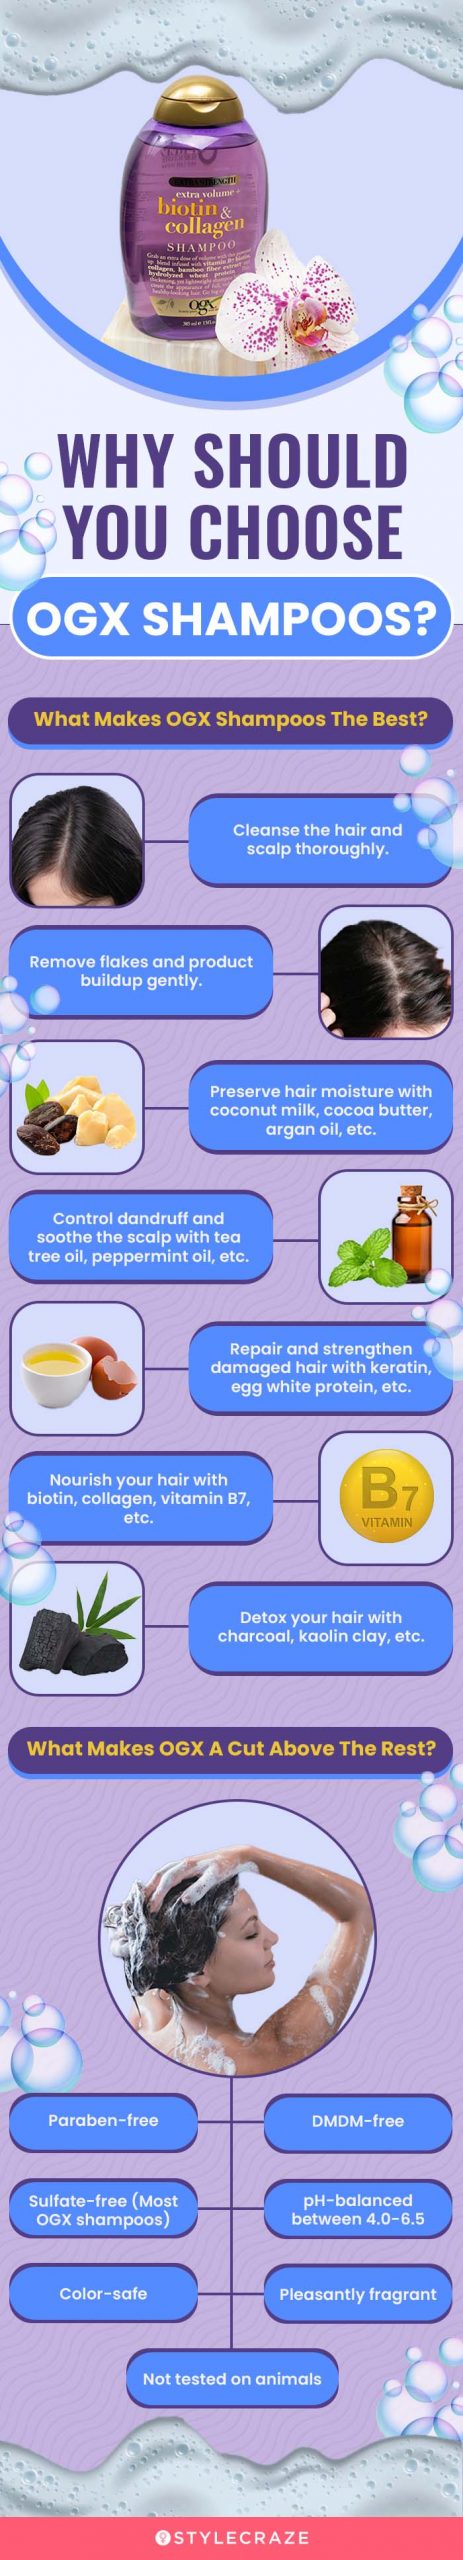 Why Should You Choose OGX Shampoos? (infographic)